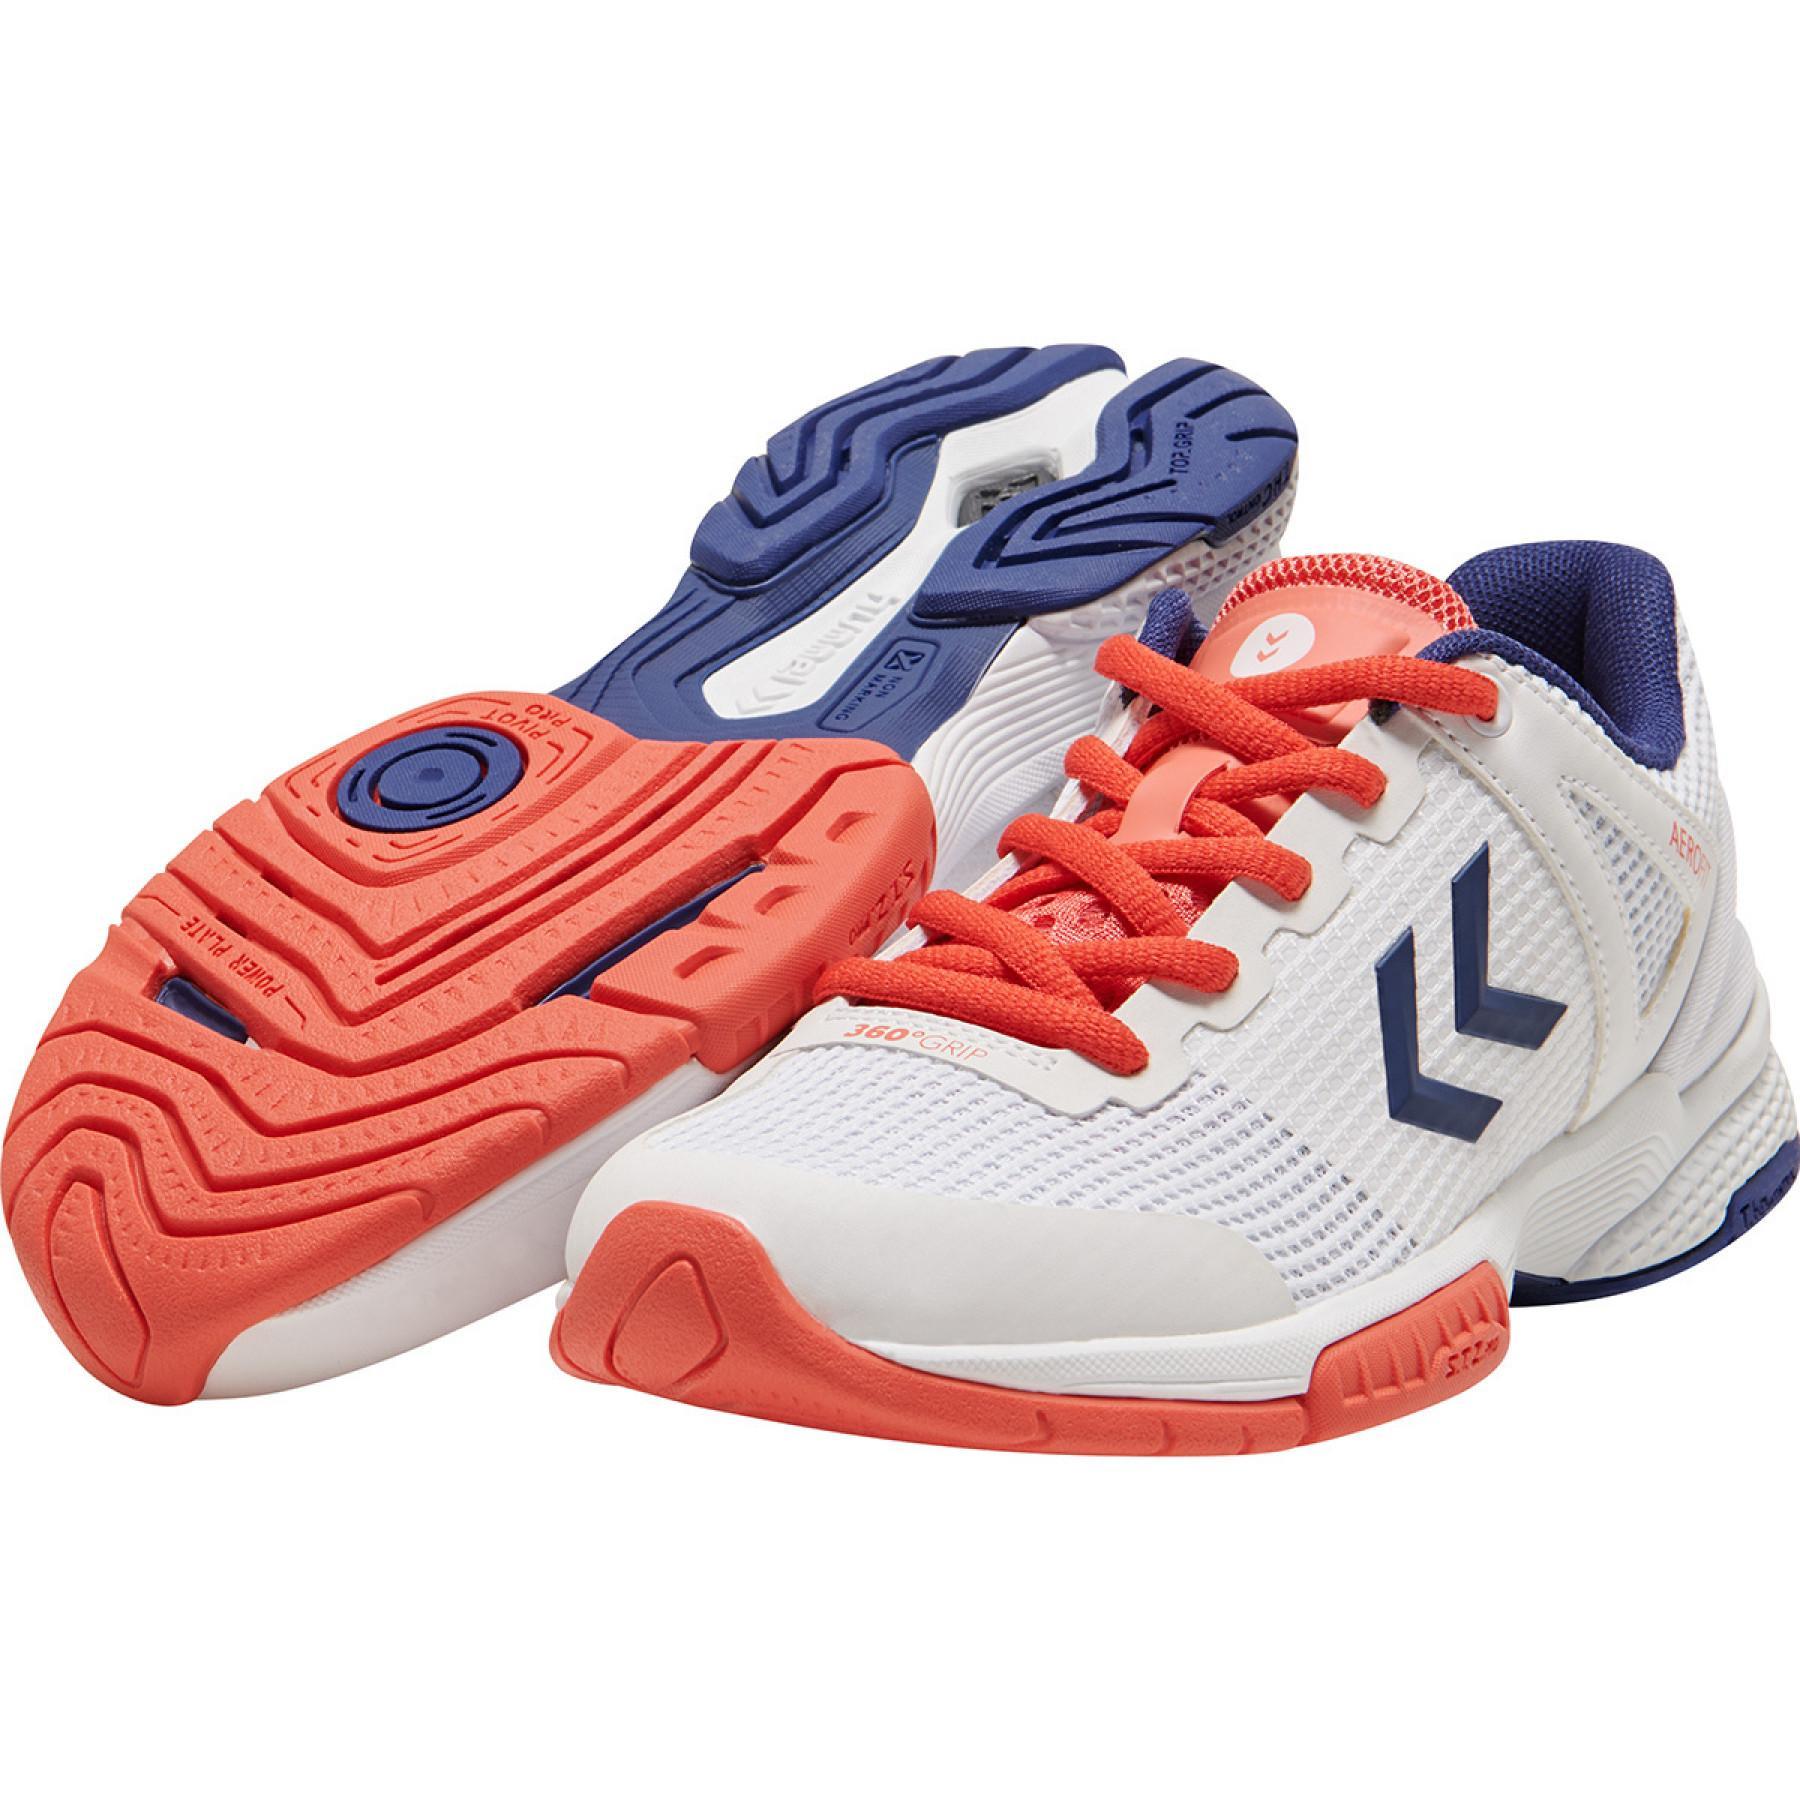 Sapatos de Mulher Hummel aerocharge hb180 rely 3.0